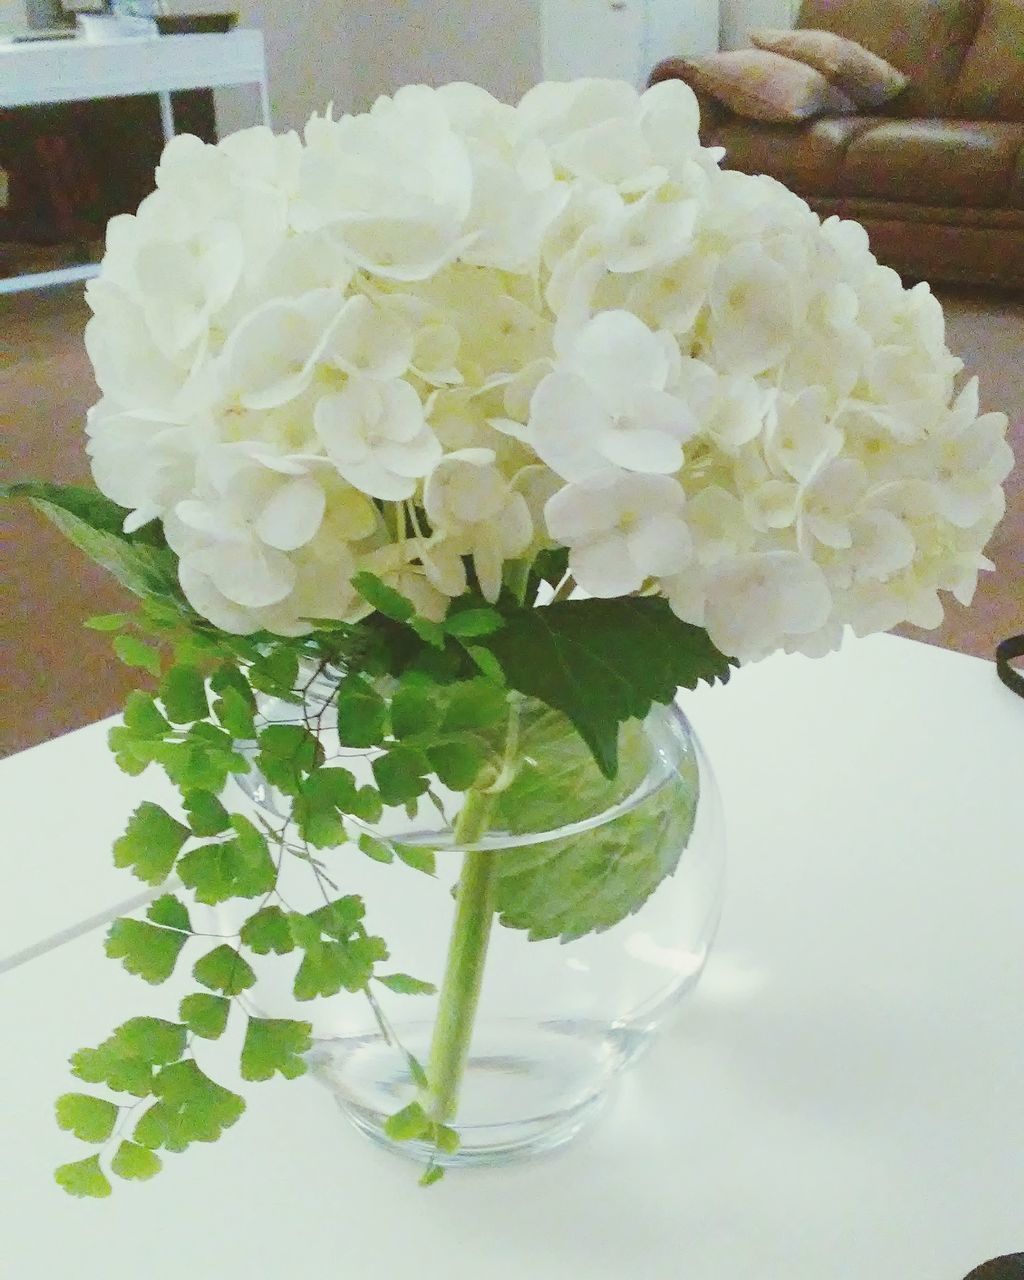 CLOSE-UP OF WHITE ROSES IN VASE